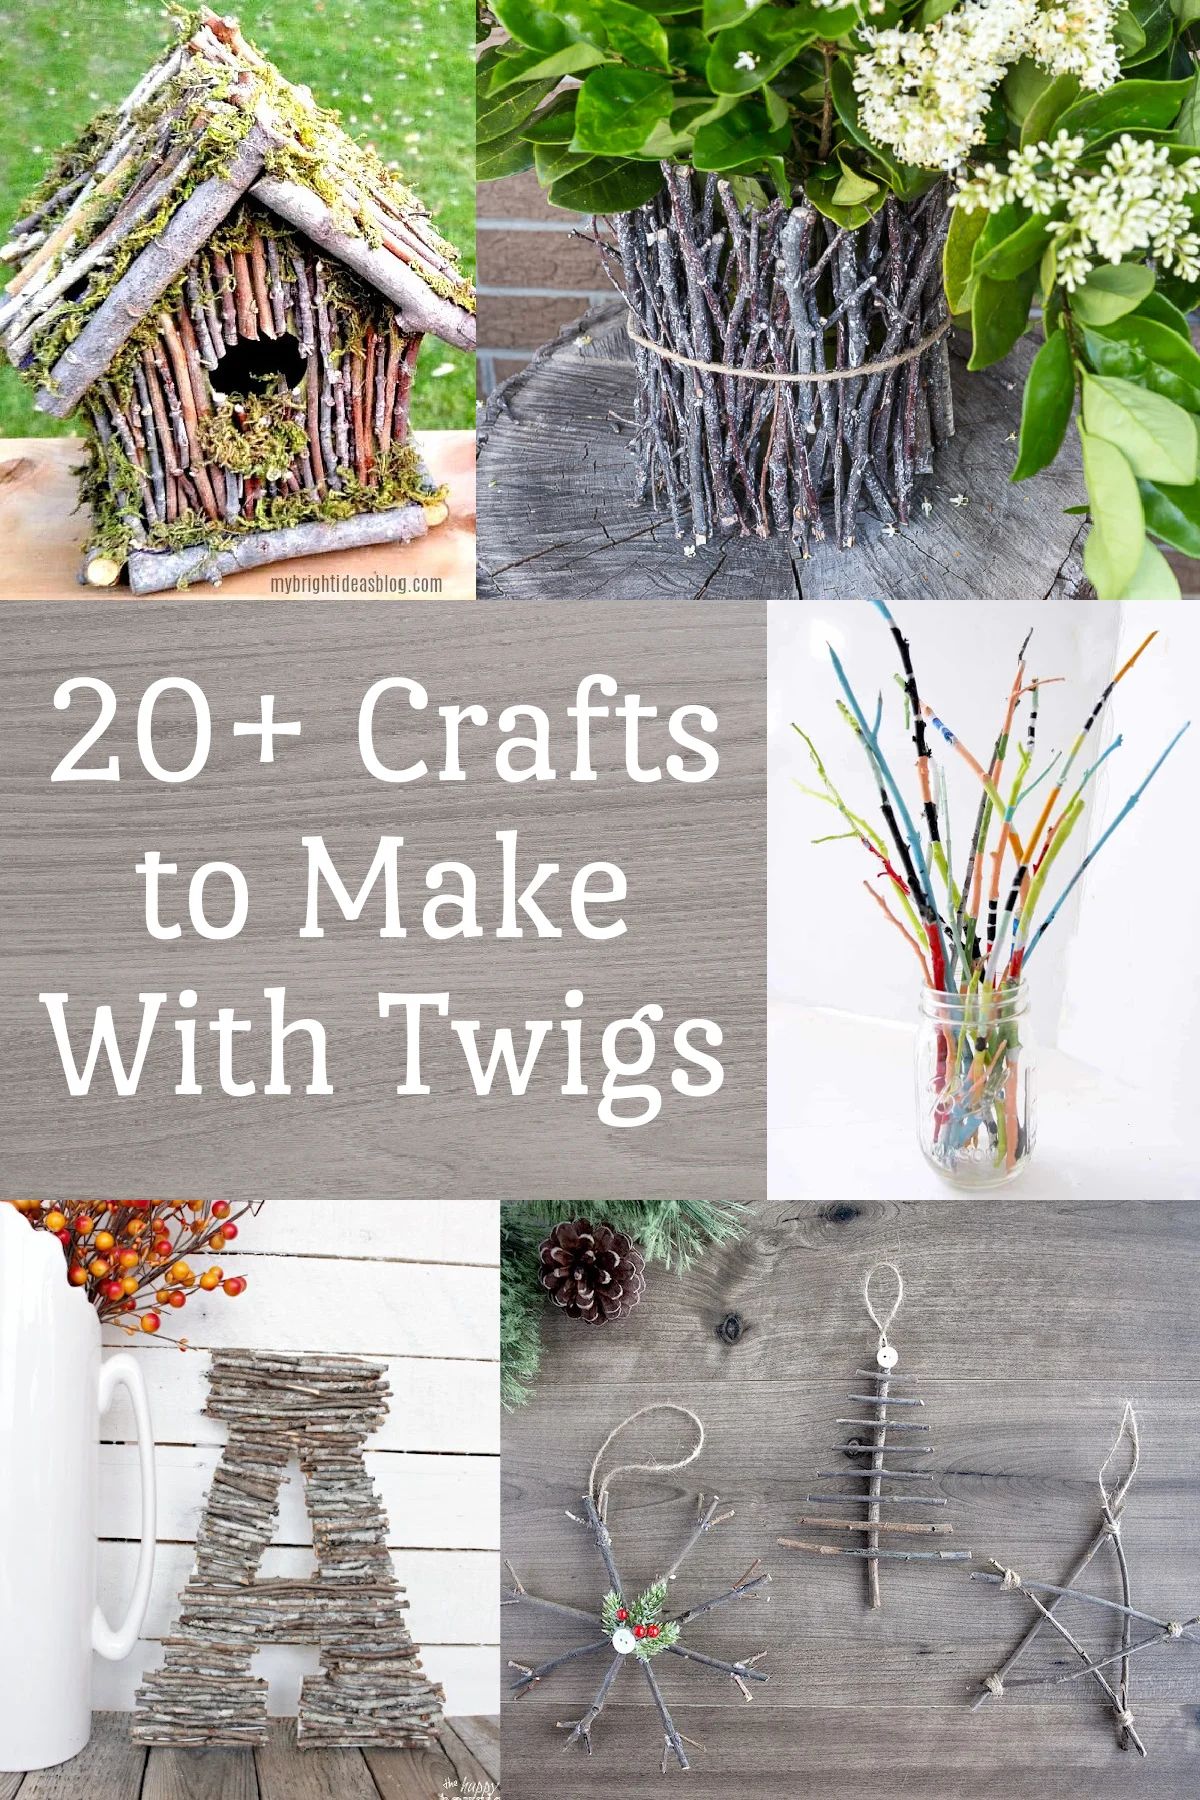 Try these creative DIY ideas to enrich your life  Twig crafts, Diy home  crafts, Diy arts and crafts